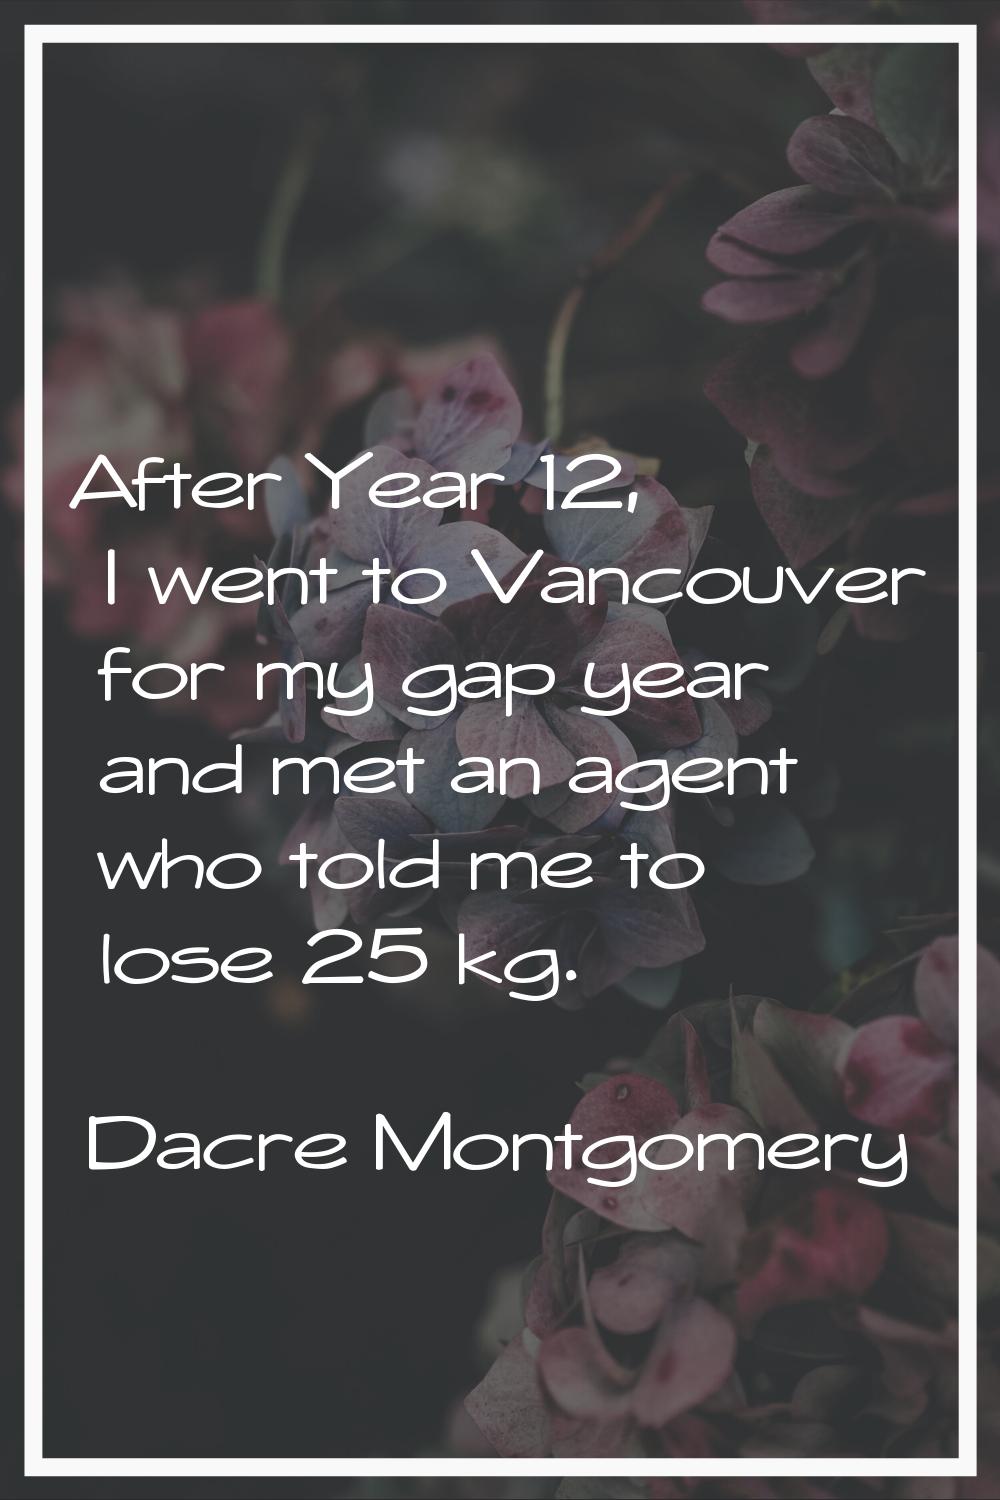 After Year 12, I went to Vancouver for my gap year and met an agent who told me to lose 25 kg.